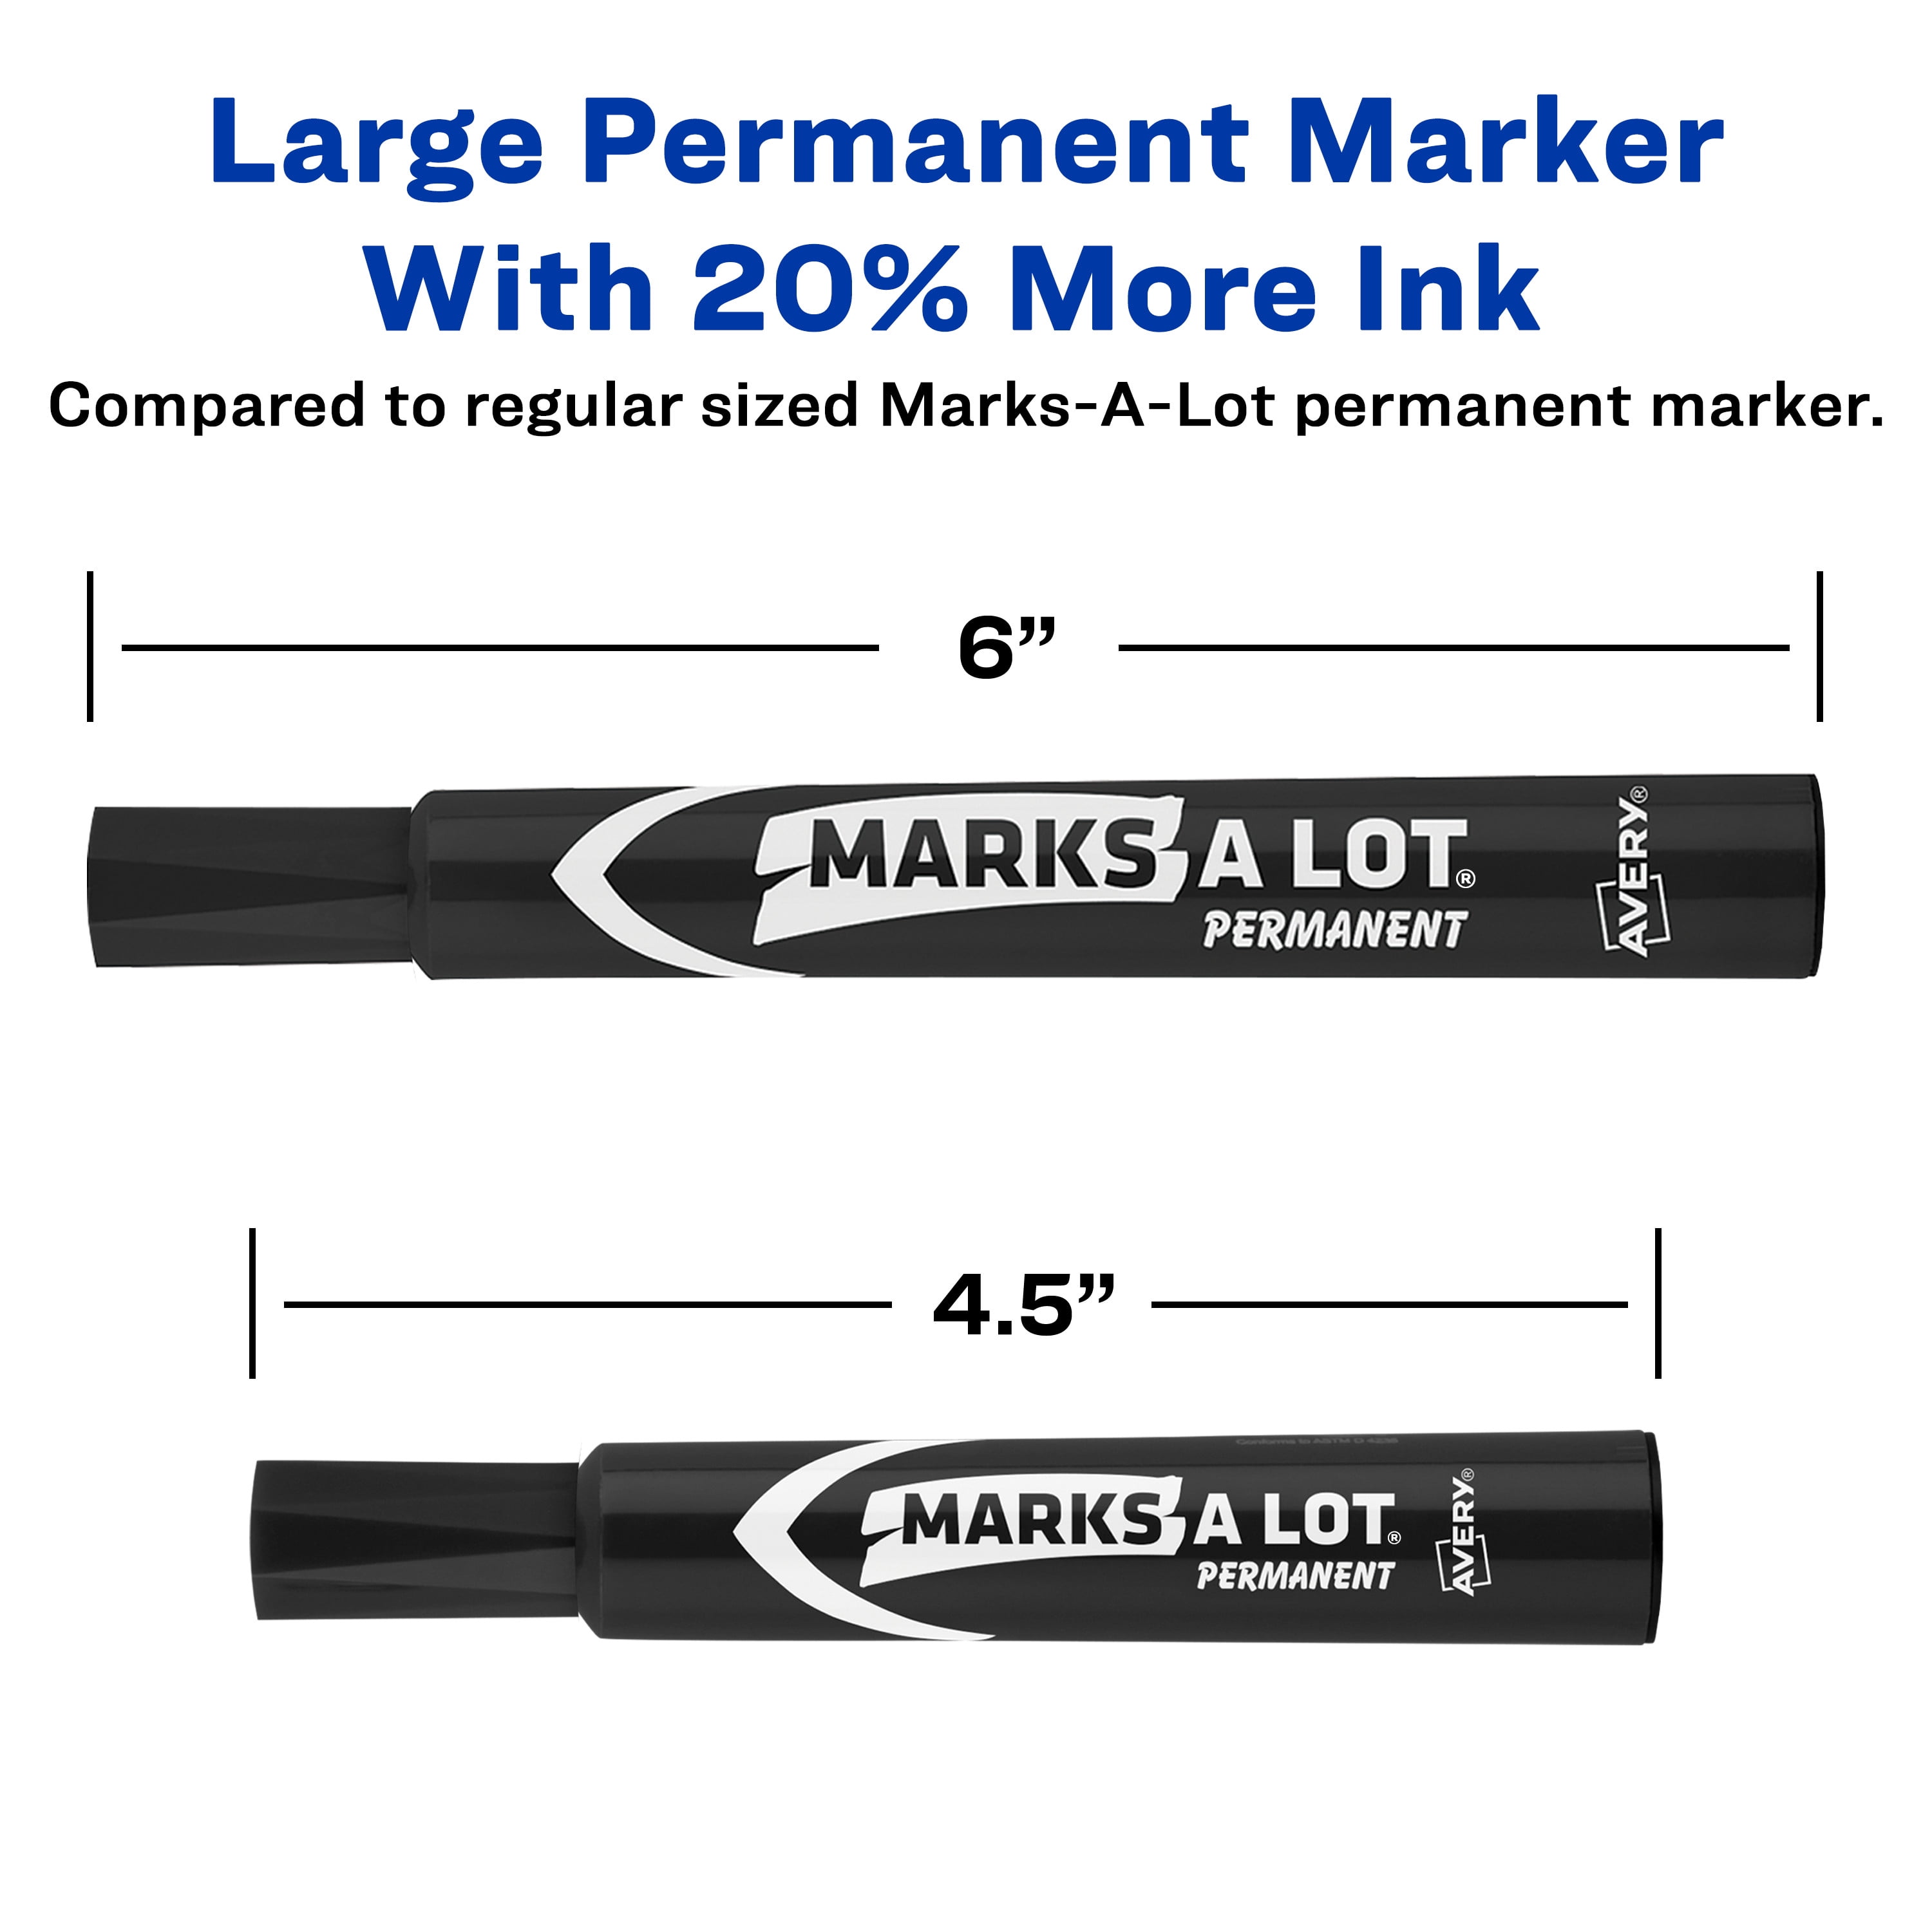 Avery Marks A Lot Permanent Markers - Large Desk-Style Size